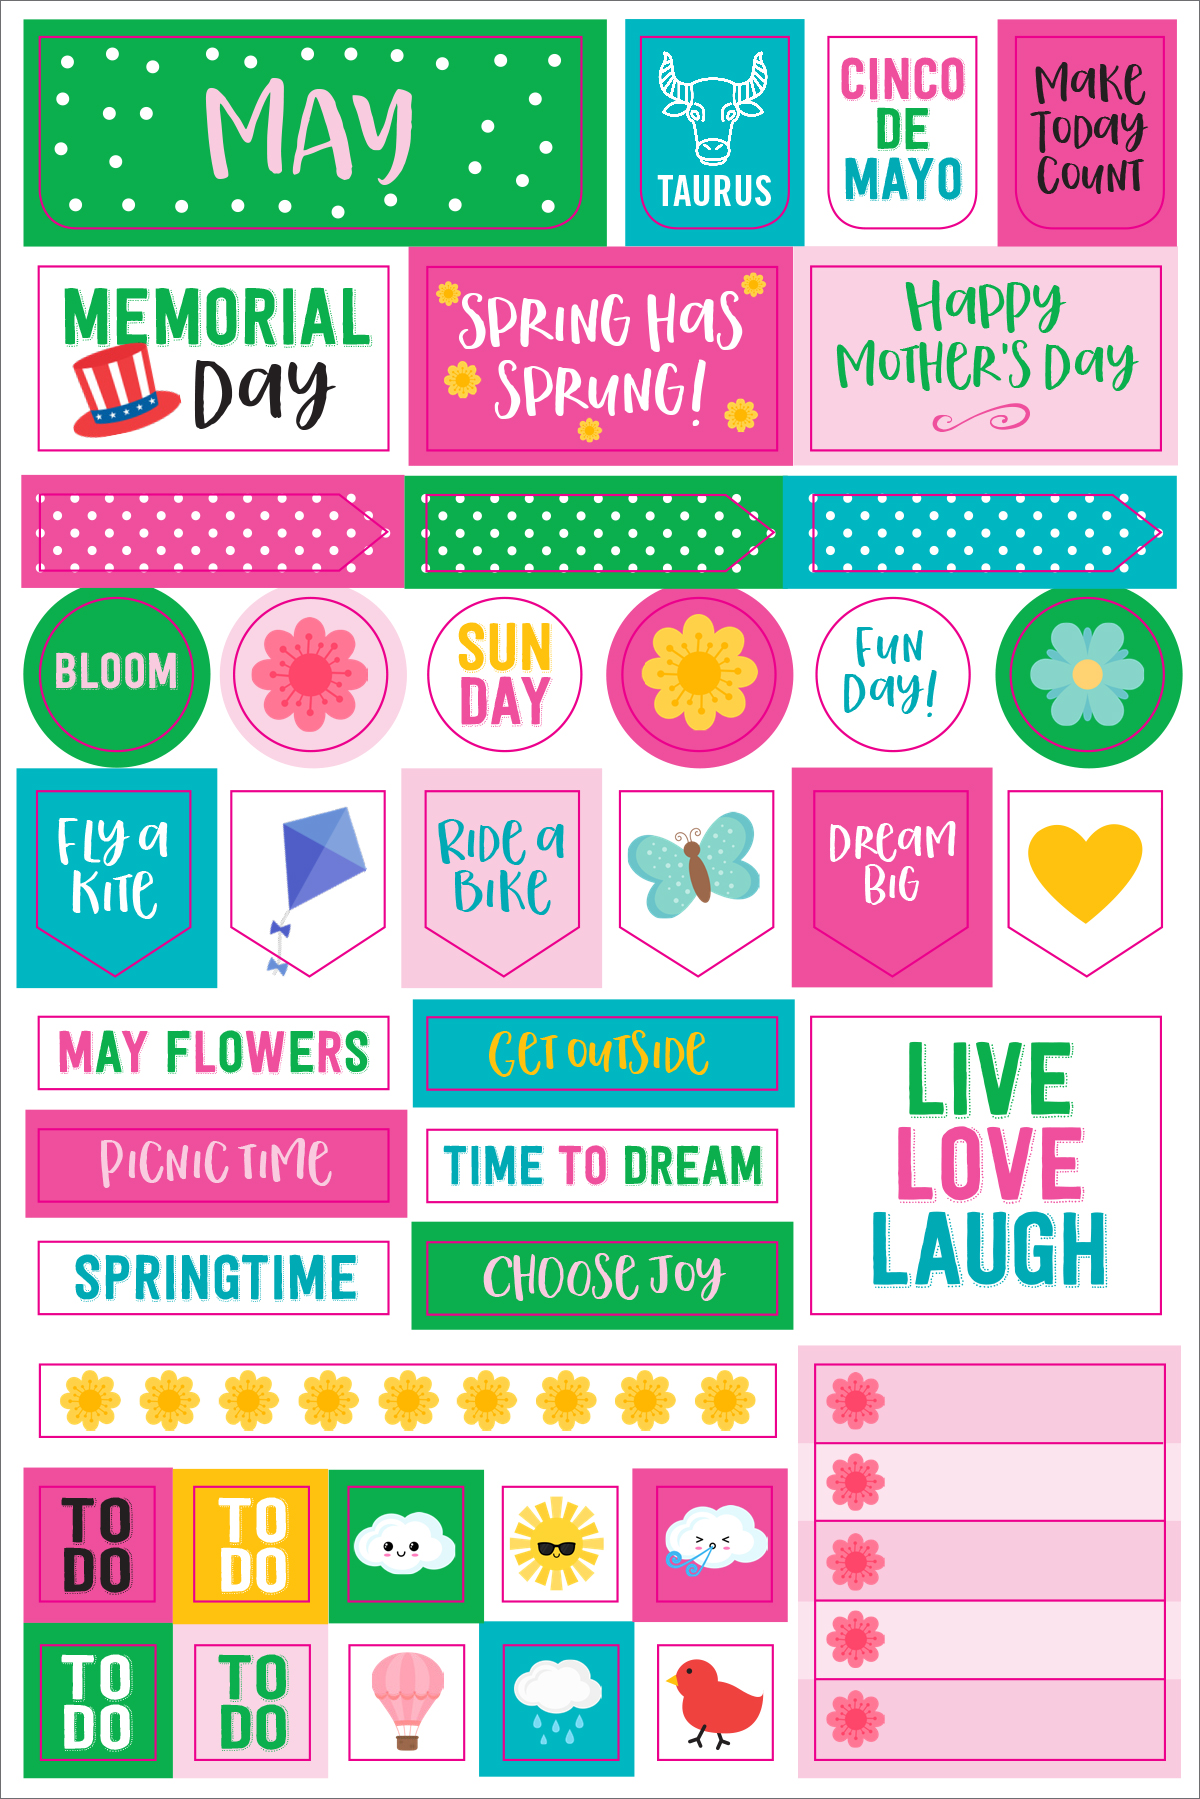 Months, Days of the Week & Number Stickers for Planners. Sticker Size – My  Happy Place Stickers